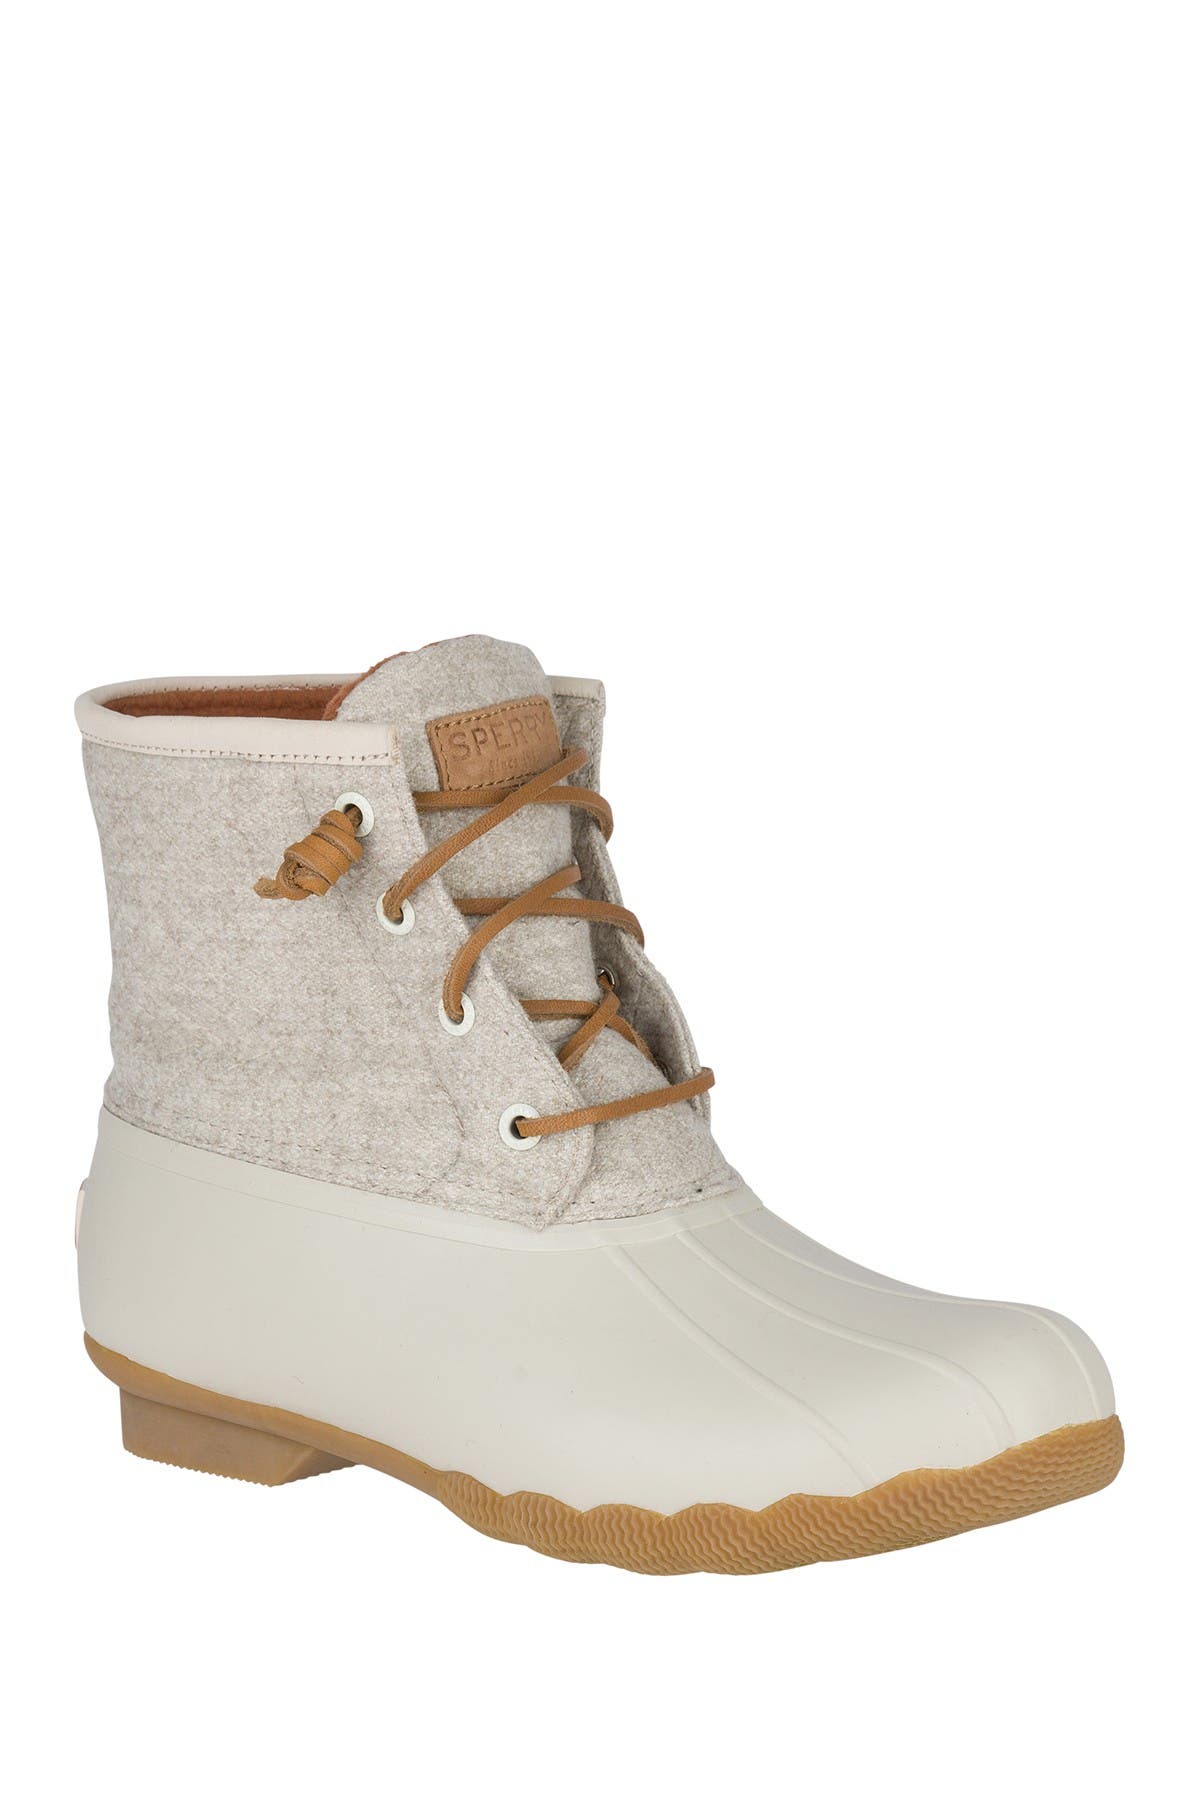 off white wool sperry duck boots